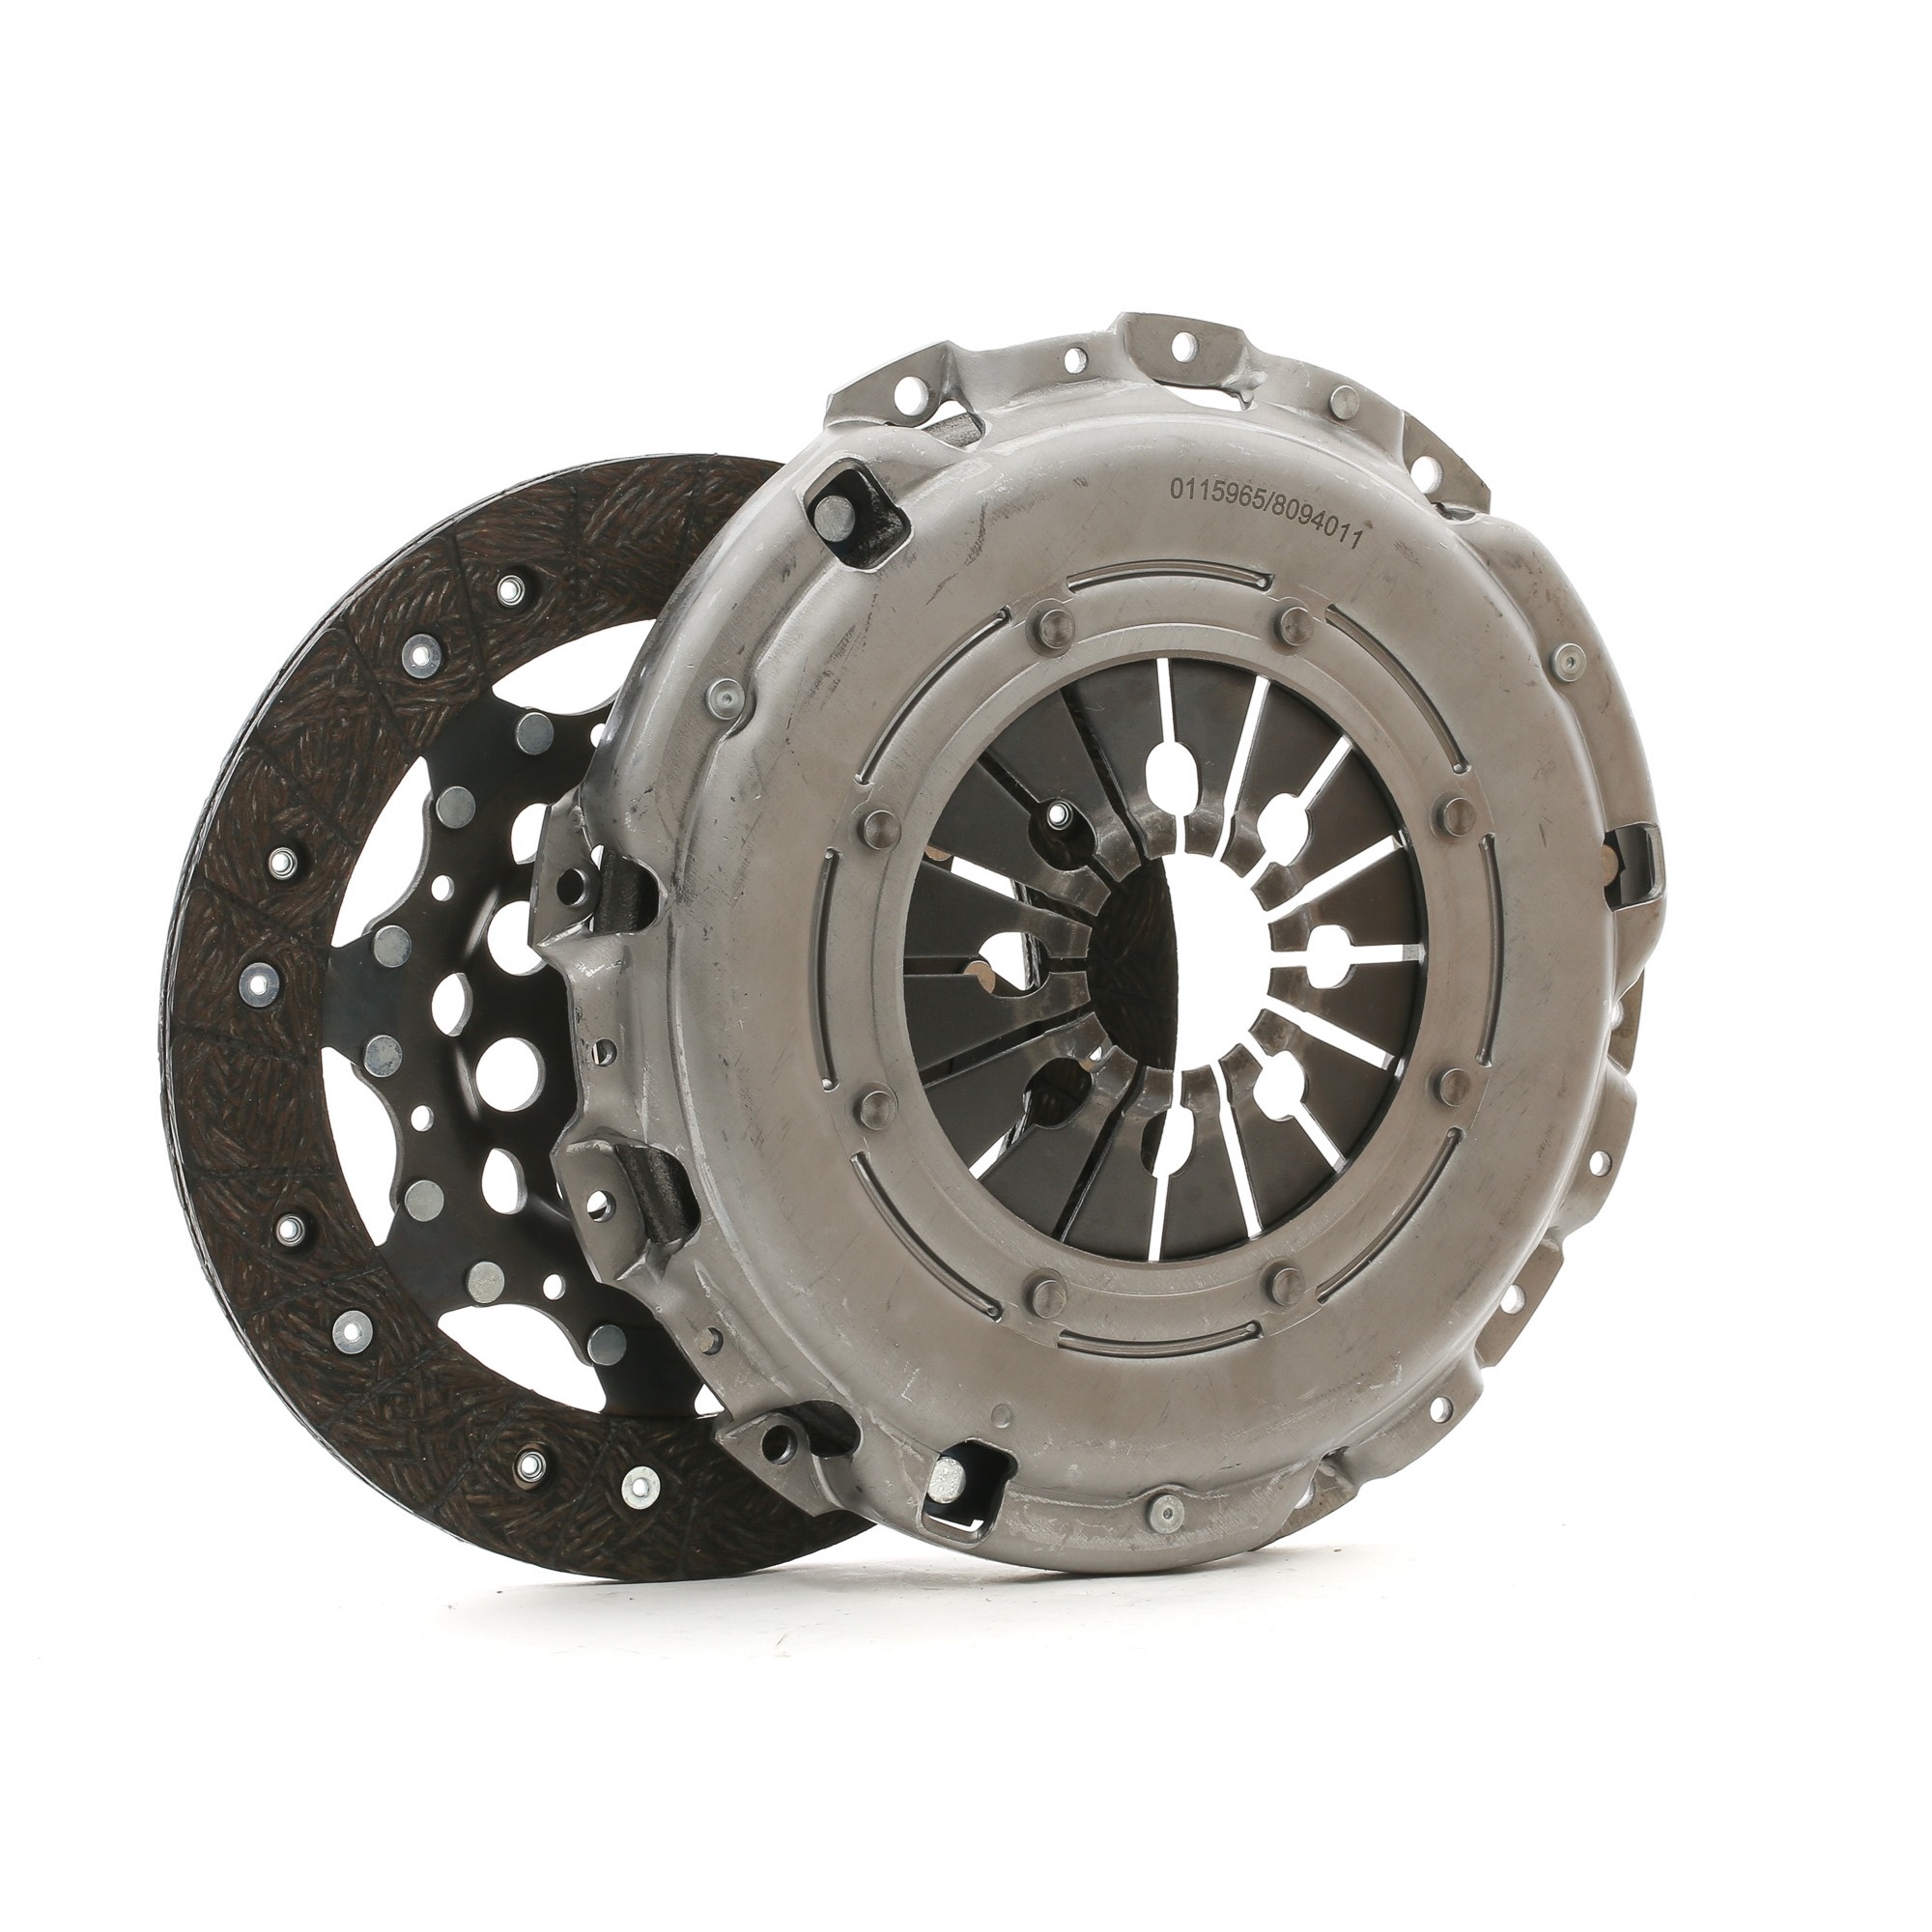 STARK SKCK-0100123 Clutch kit with clutch pressure plate, without central slave cylinder, with clutch disc, 241, 240mm